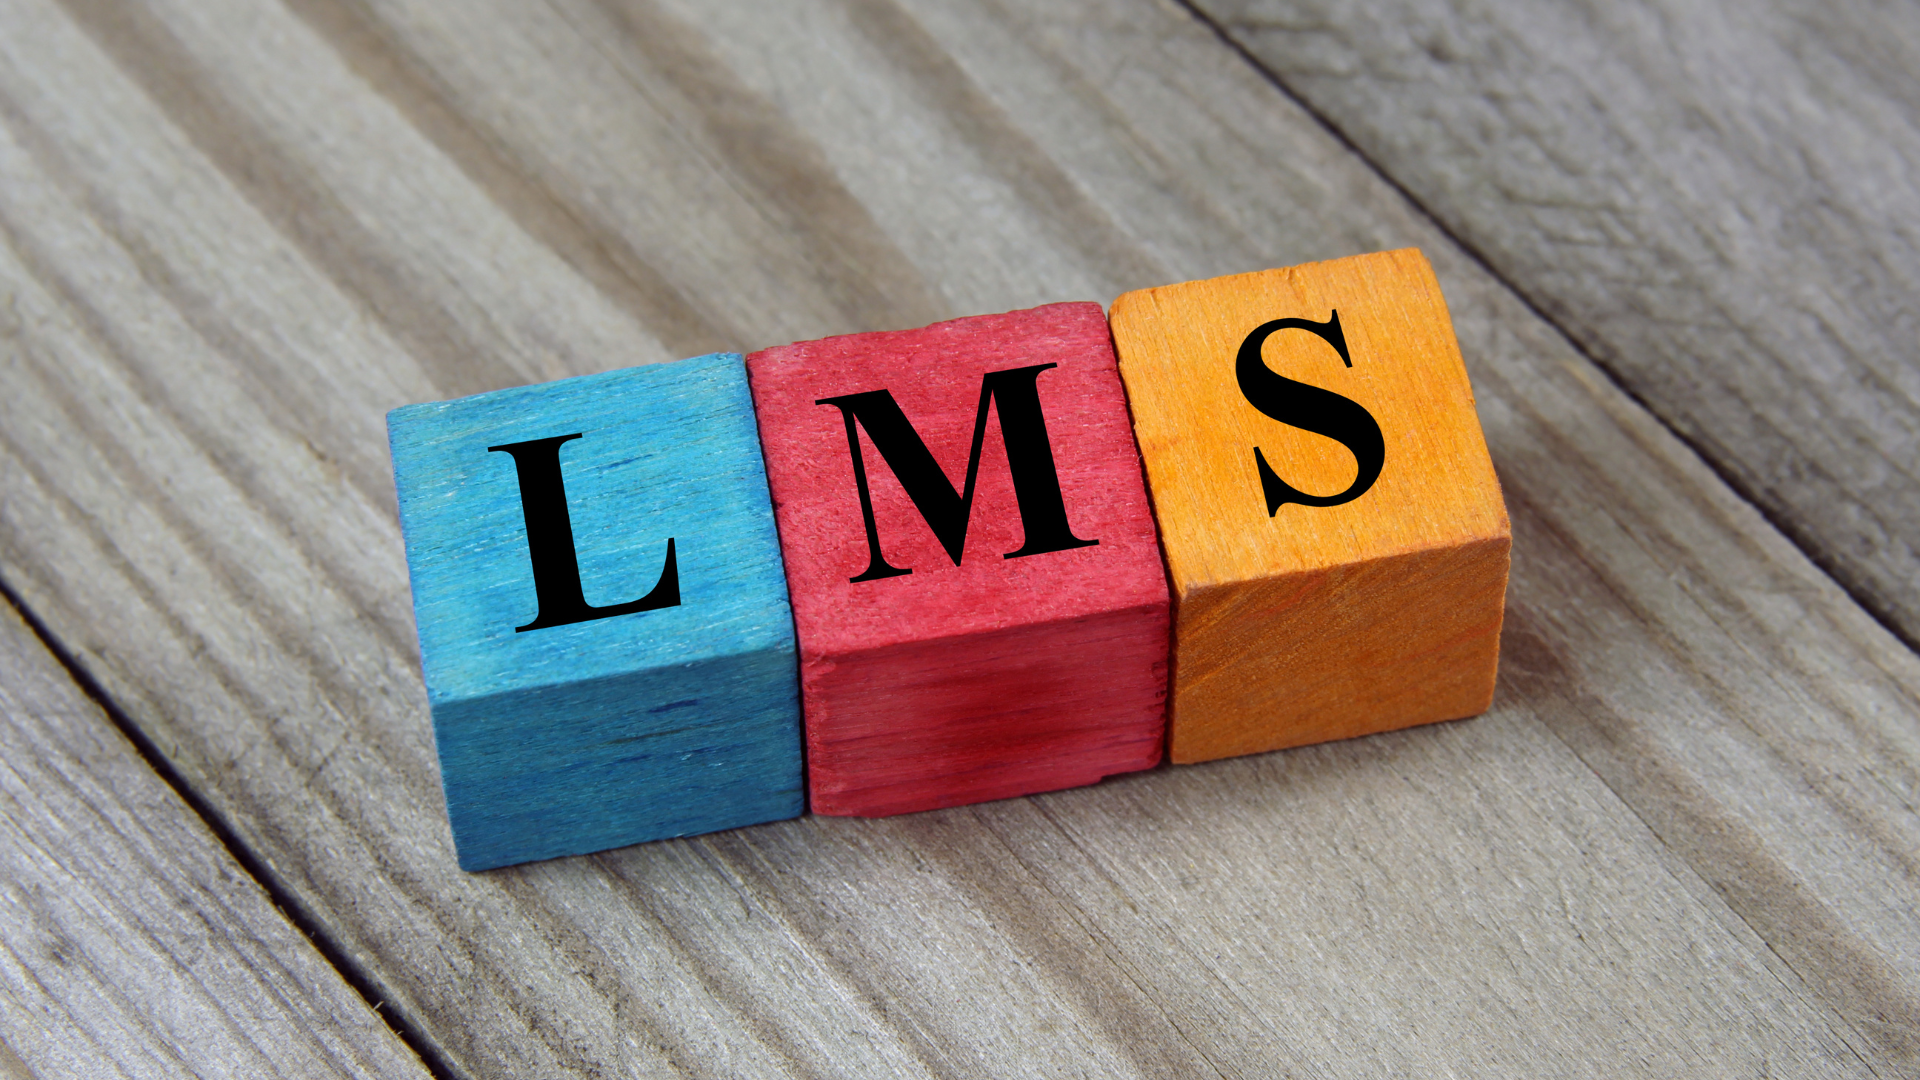 Benefits of an lms software for your company